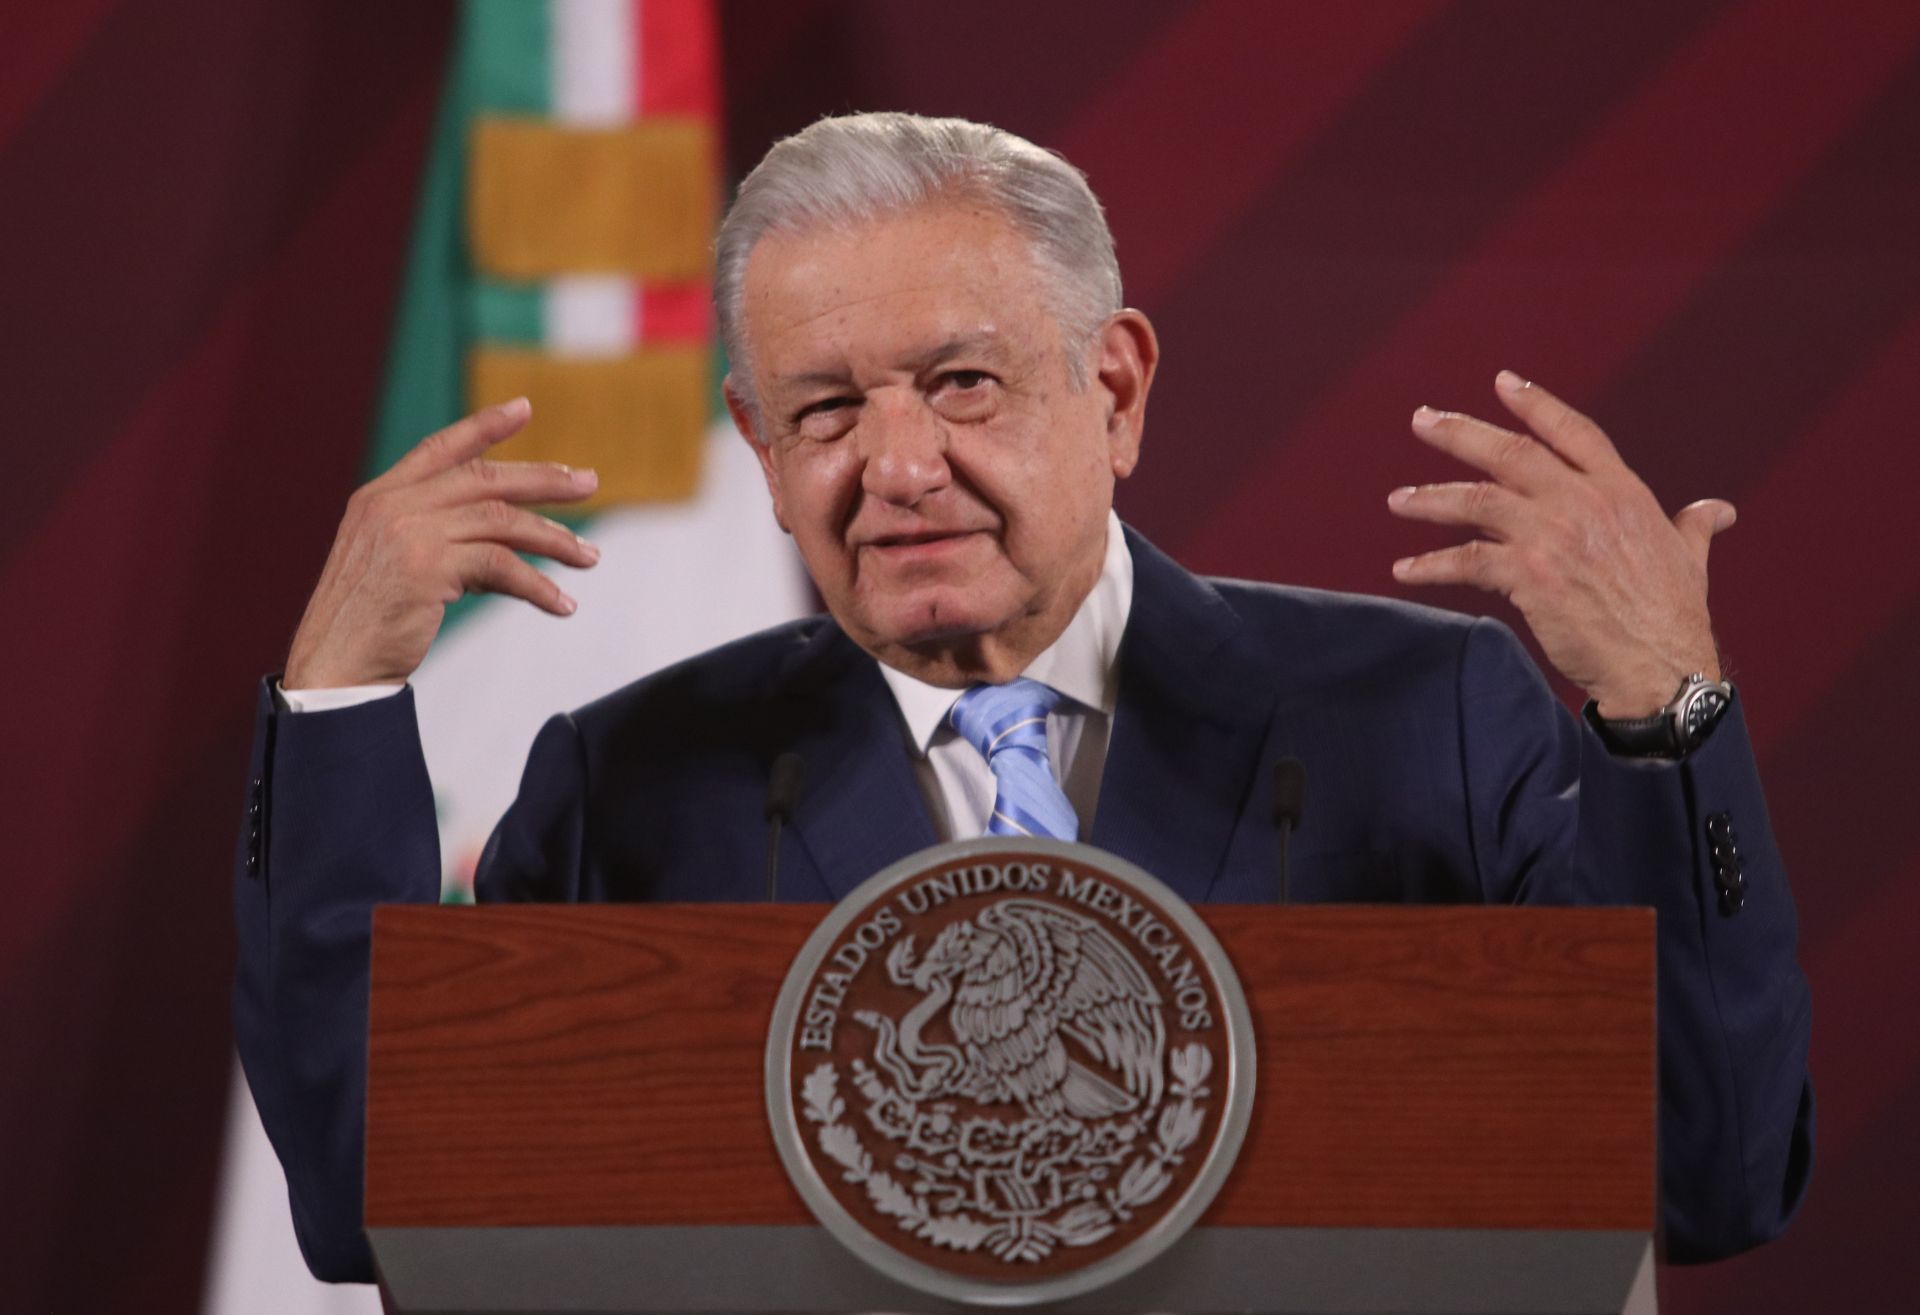 The Federal Executive, headed by Andrés Manuel López Obrador, requested to resolve an unconstitutionality action prior to the one filed against Plan B (CUARTOSCURO)